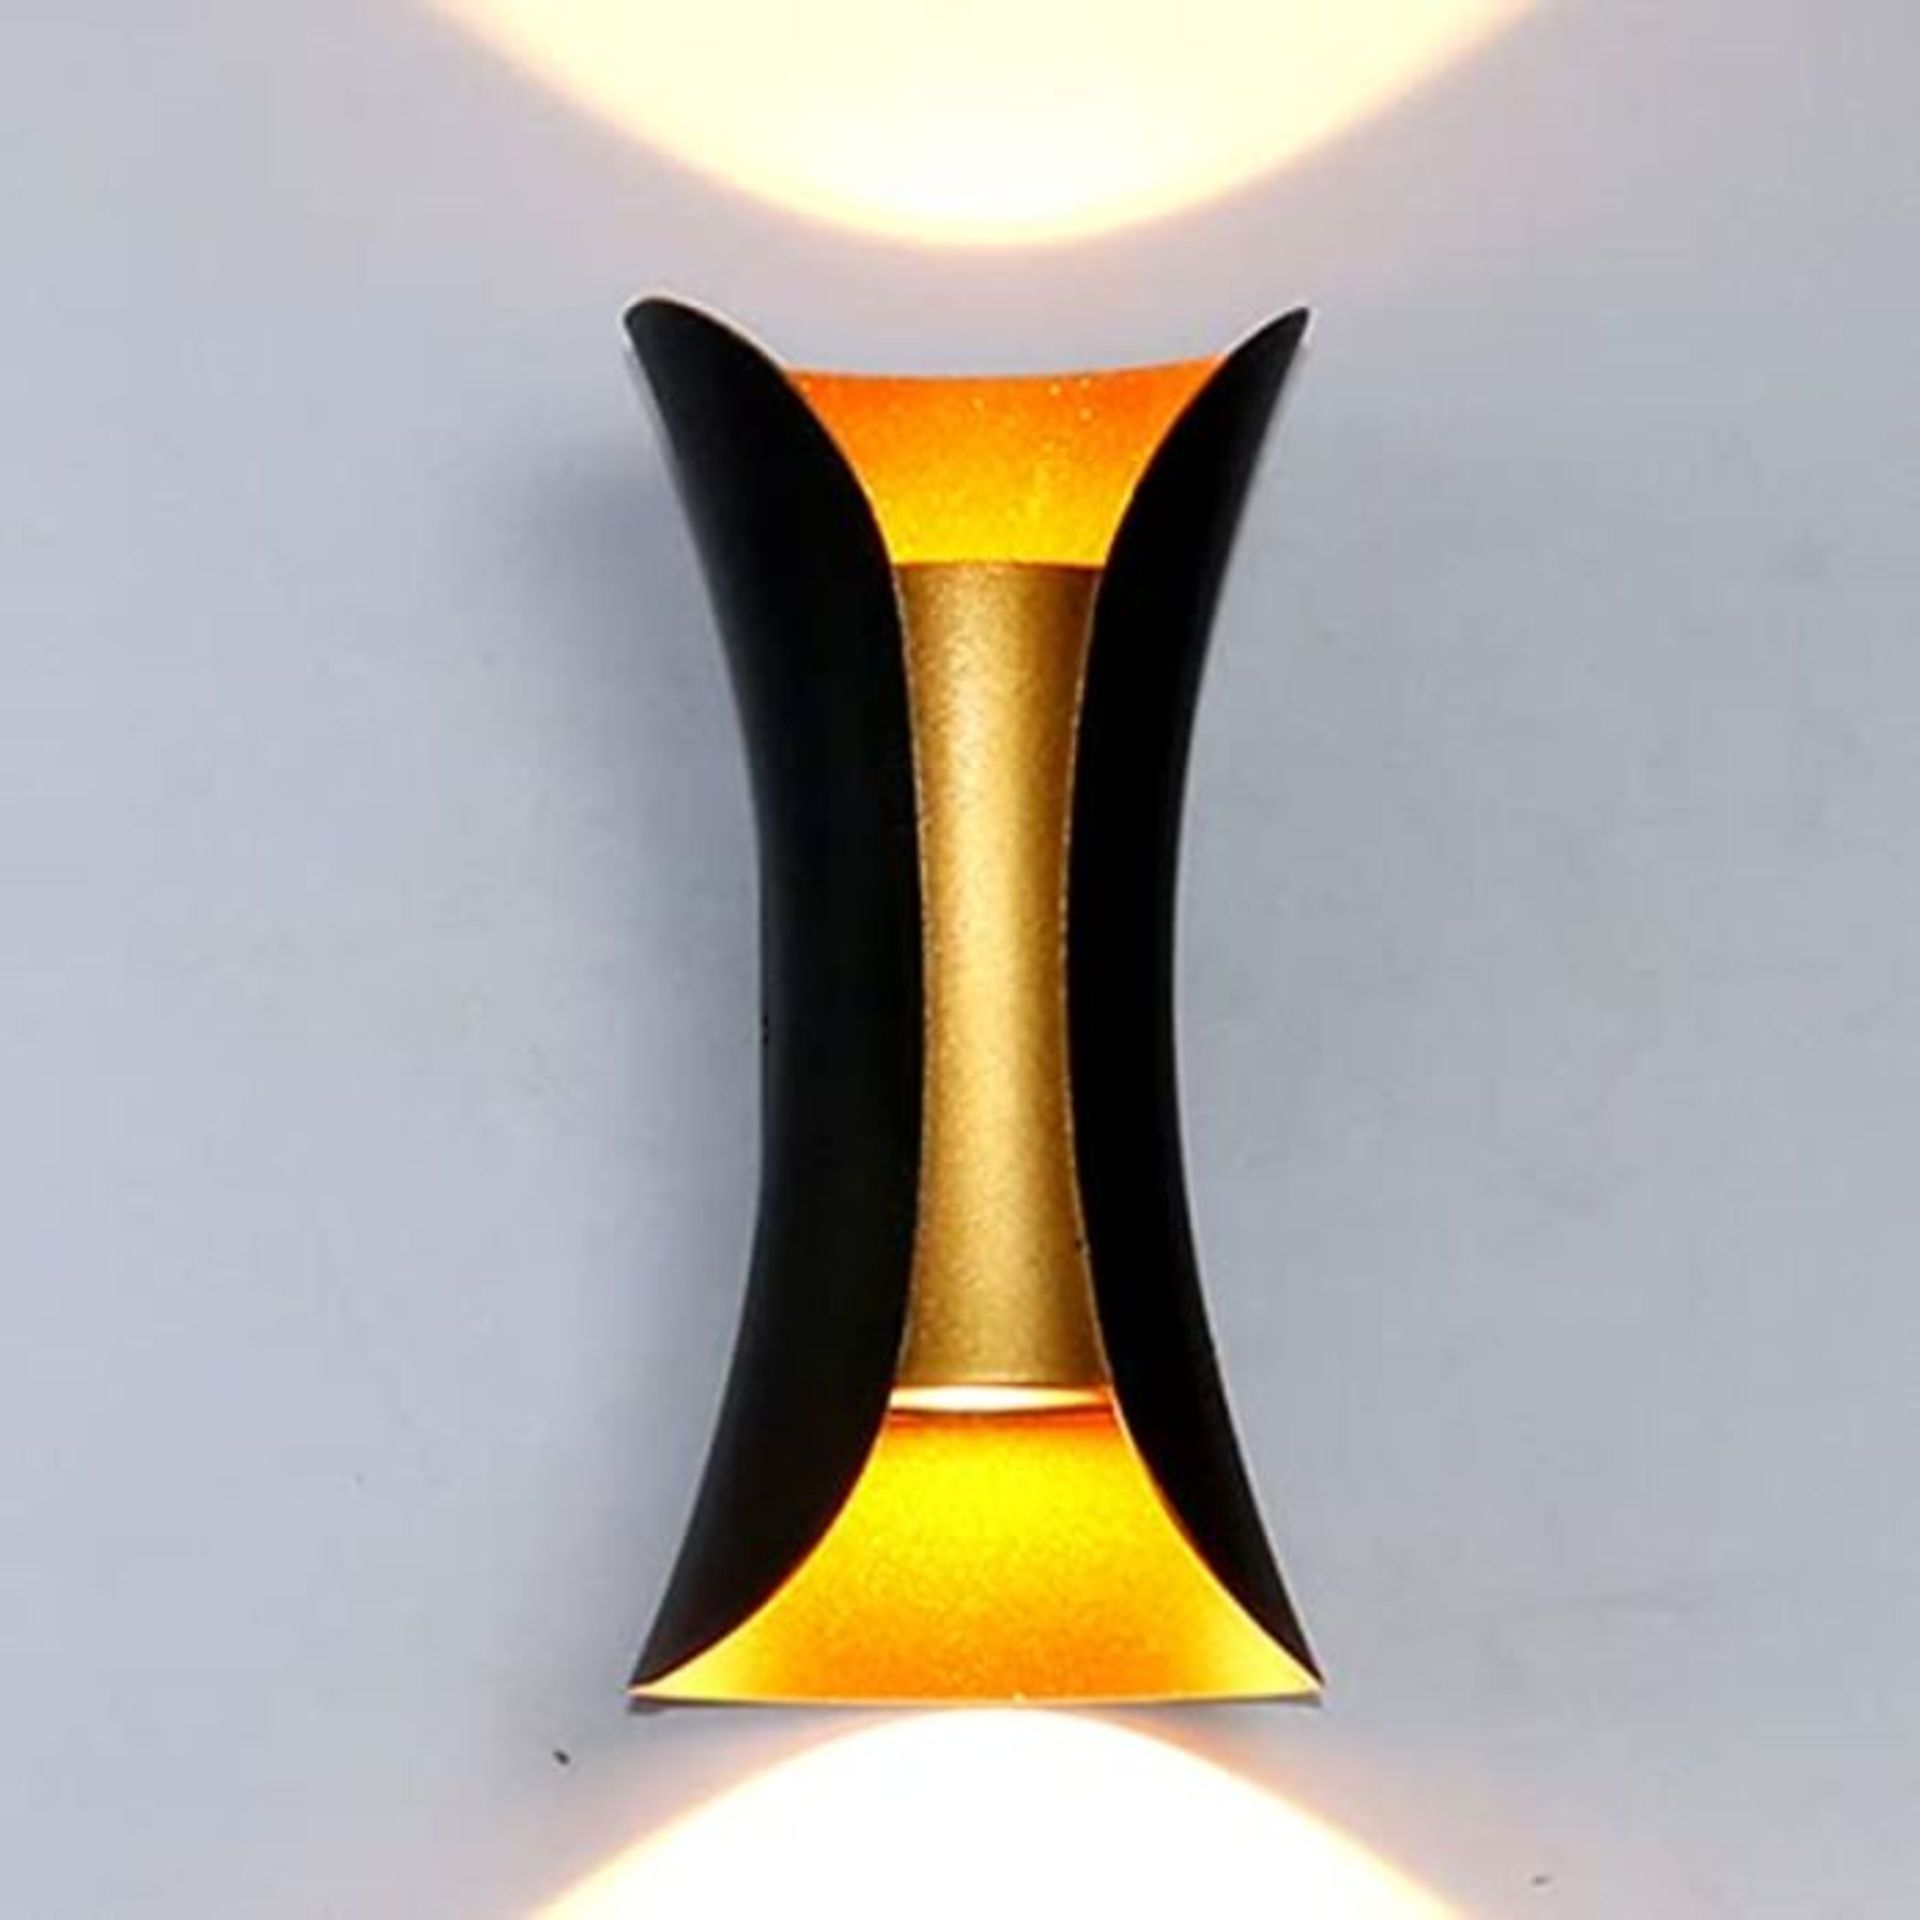 Modern LED Wall Light Sconces IP65 Waterproof Outside Wall Lighting Indoor Outdoor Up